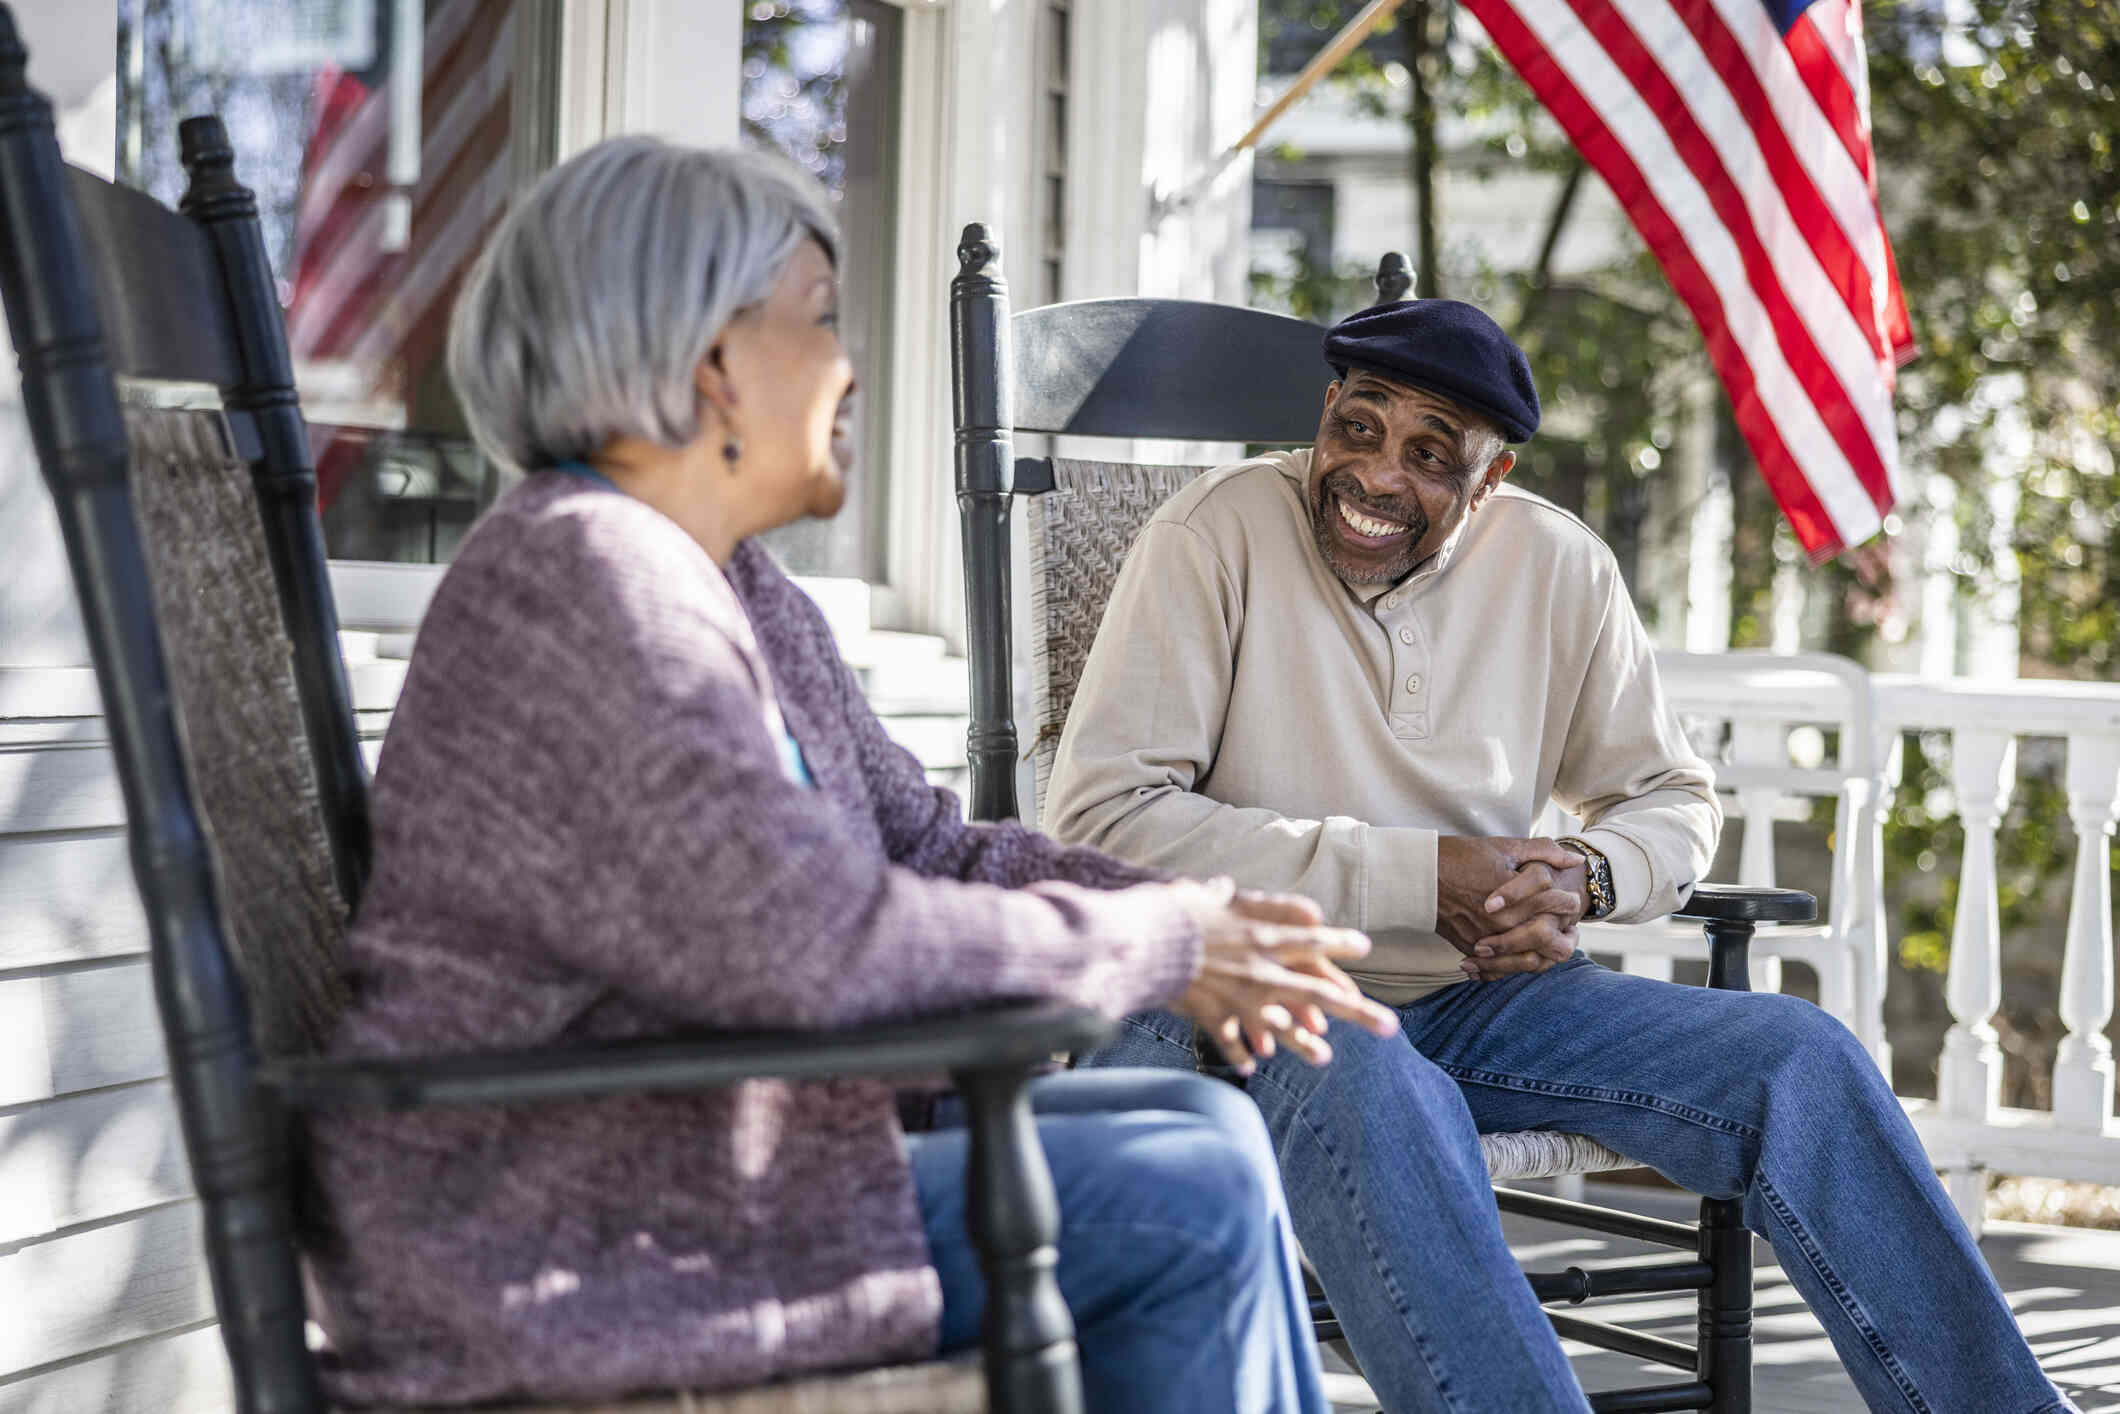 An elderly male and female couple sit in rocking chairs on the front porch and smile while chatting with one another on a sunny day.